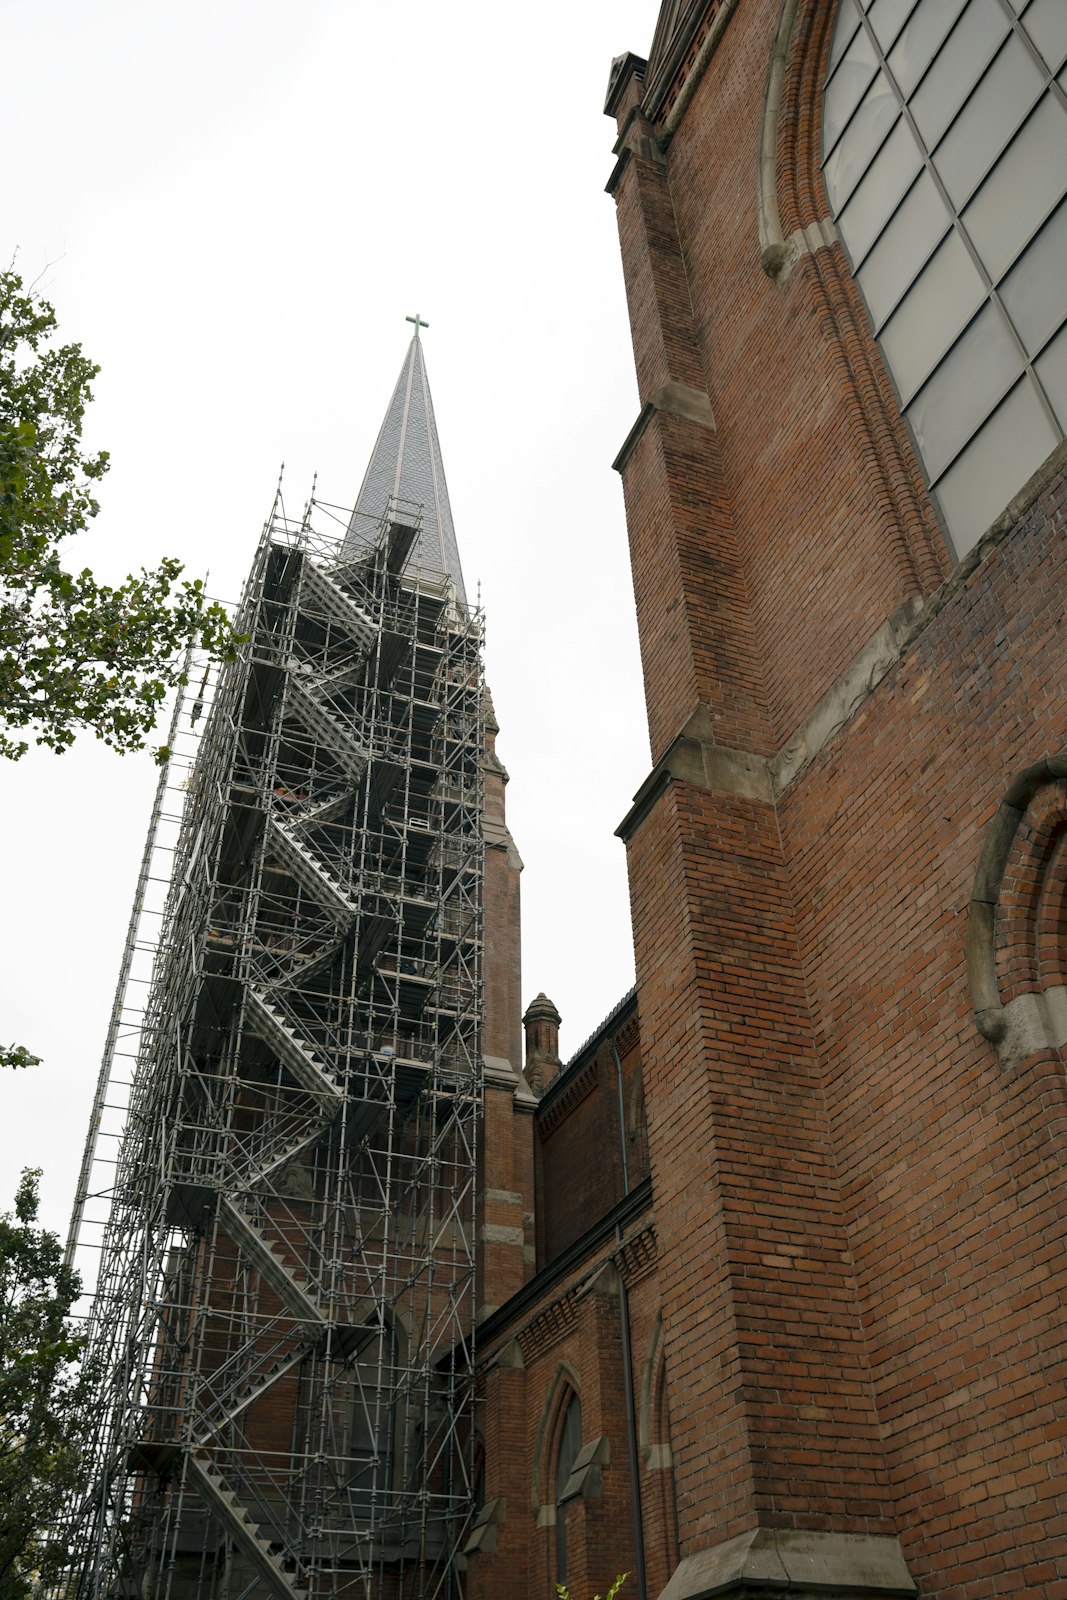 The towers have been under construction since May, and the $3 million renovation has been paid in full. The renovations will officially be complete by the end of October, and the scaffolding will come down in November, Msgr. Kosanke said.